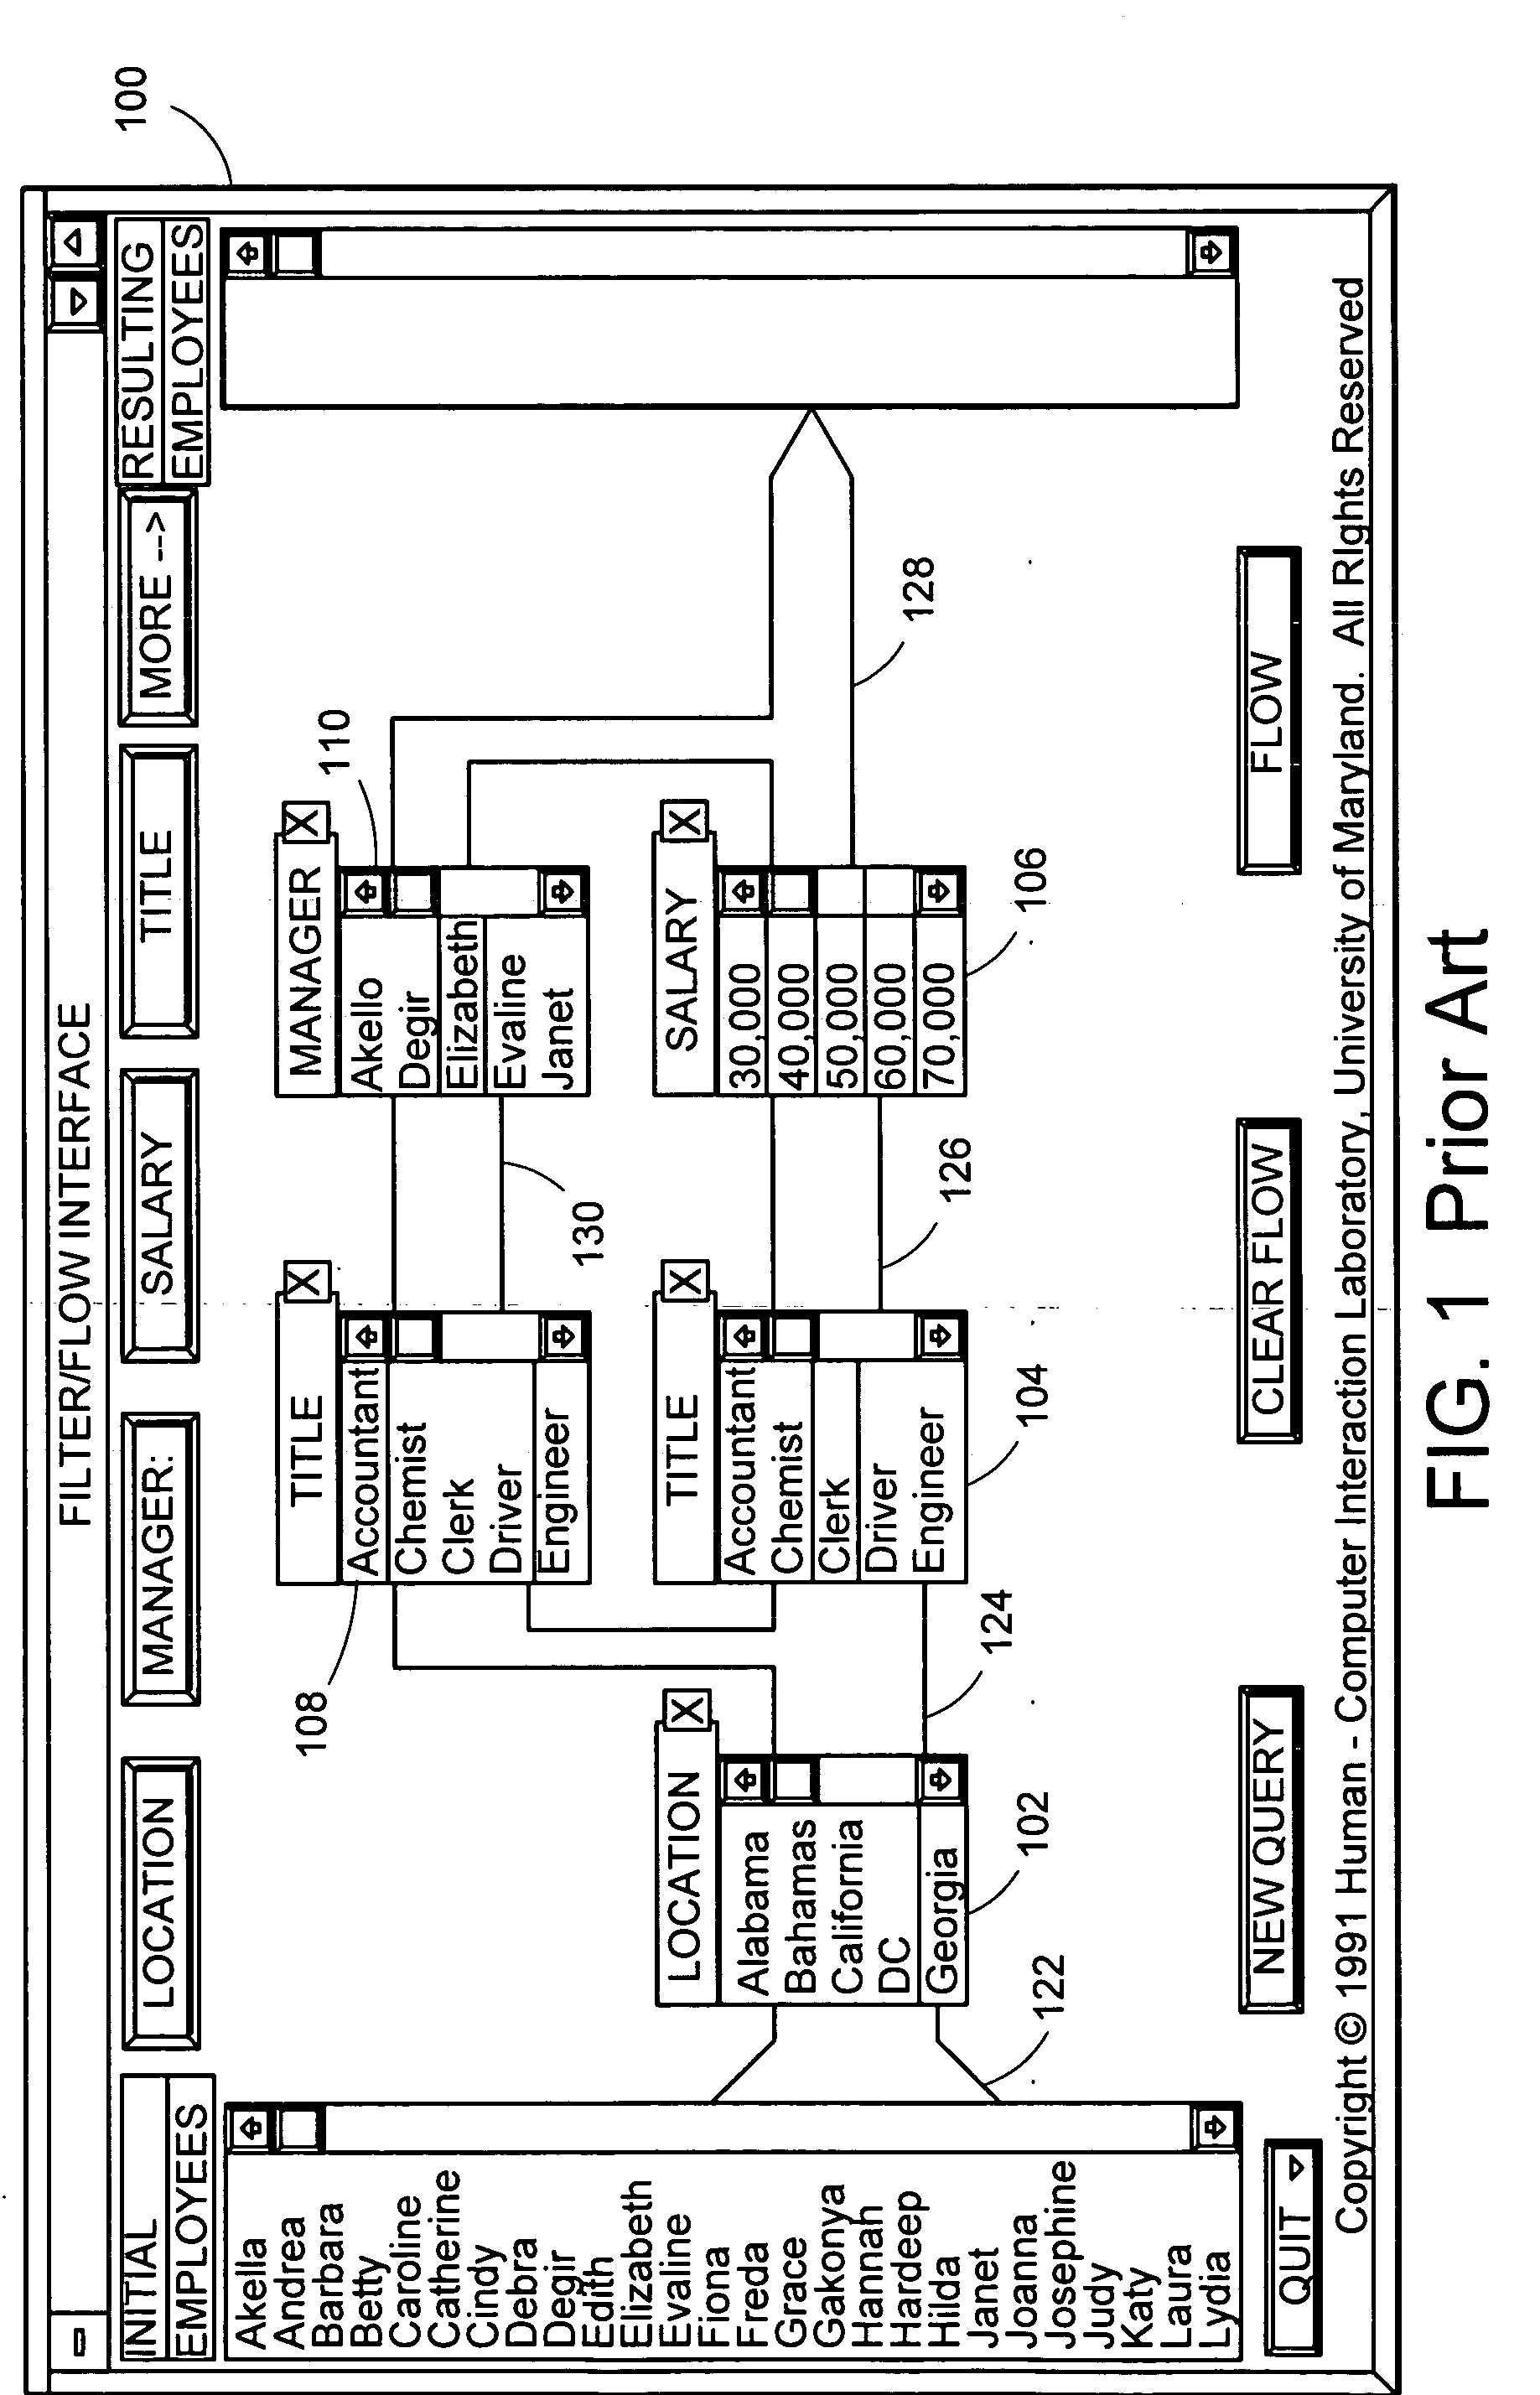 Graphical condition builder for facilitating database queries